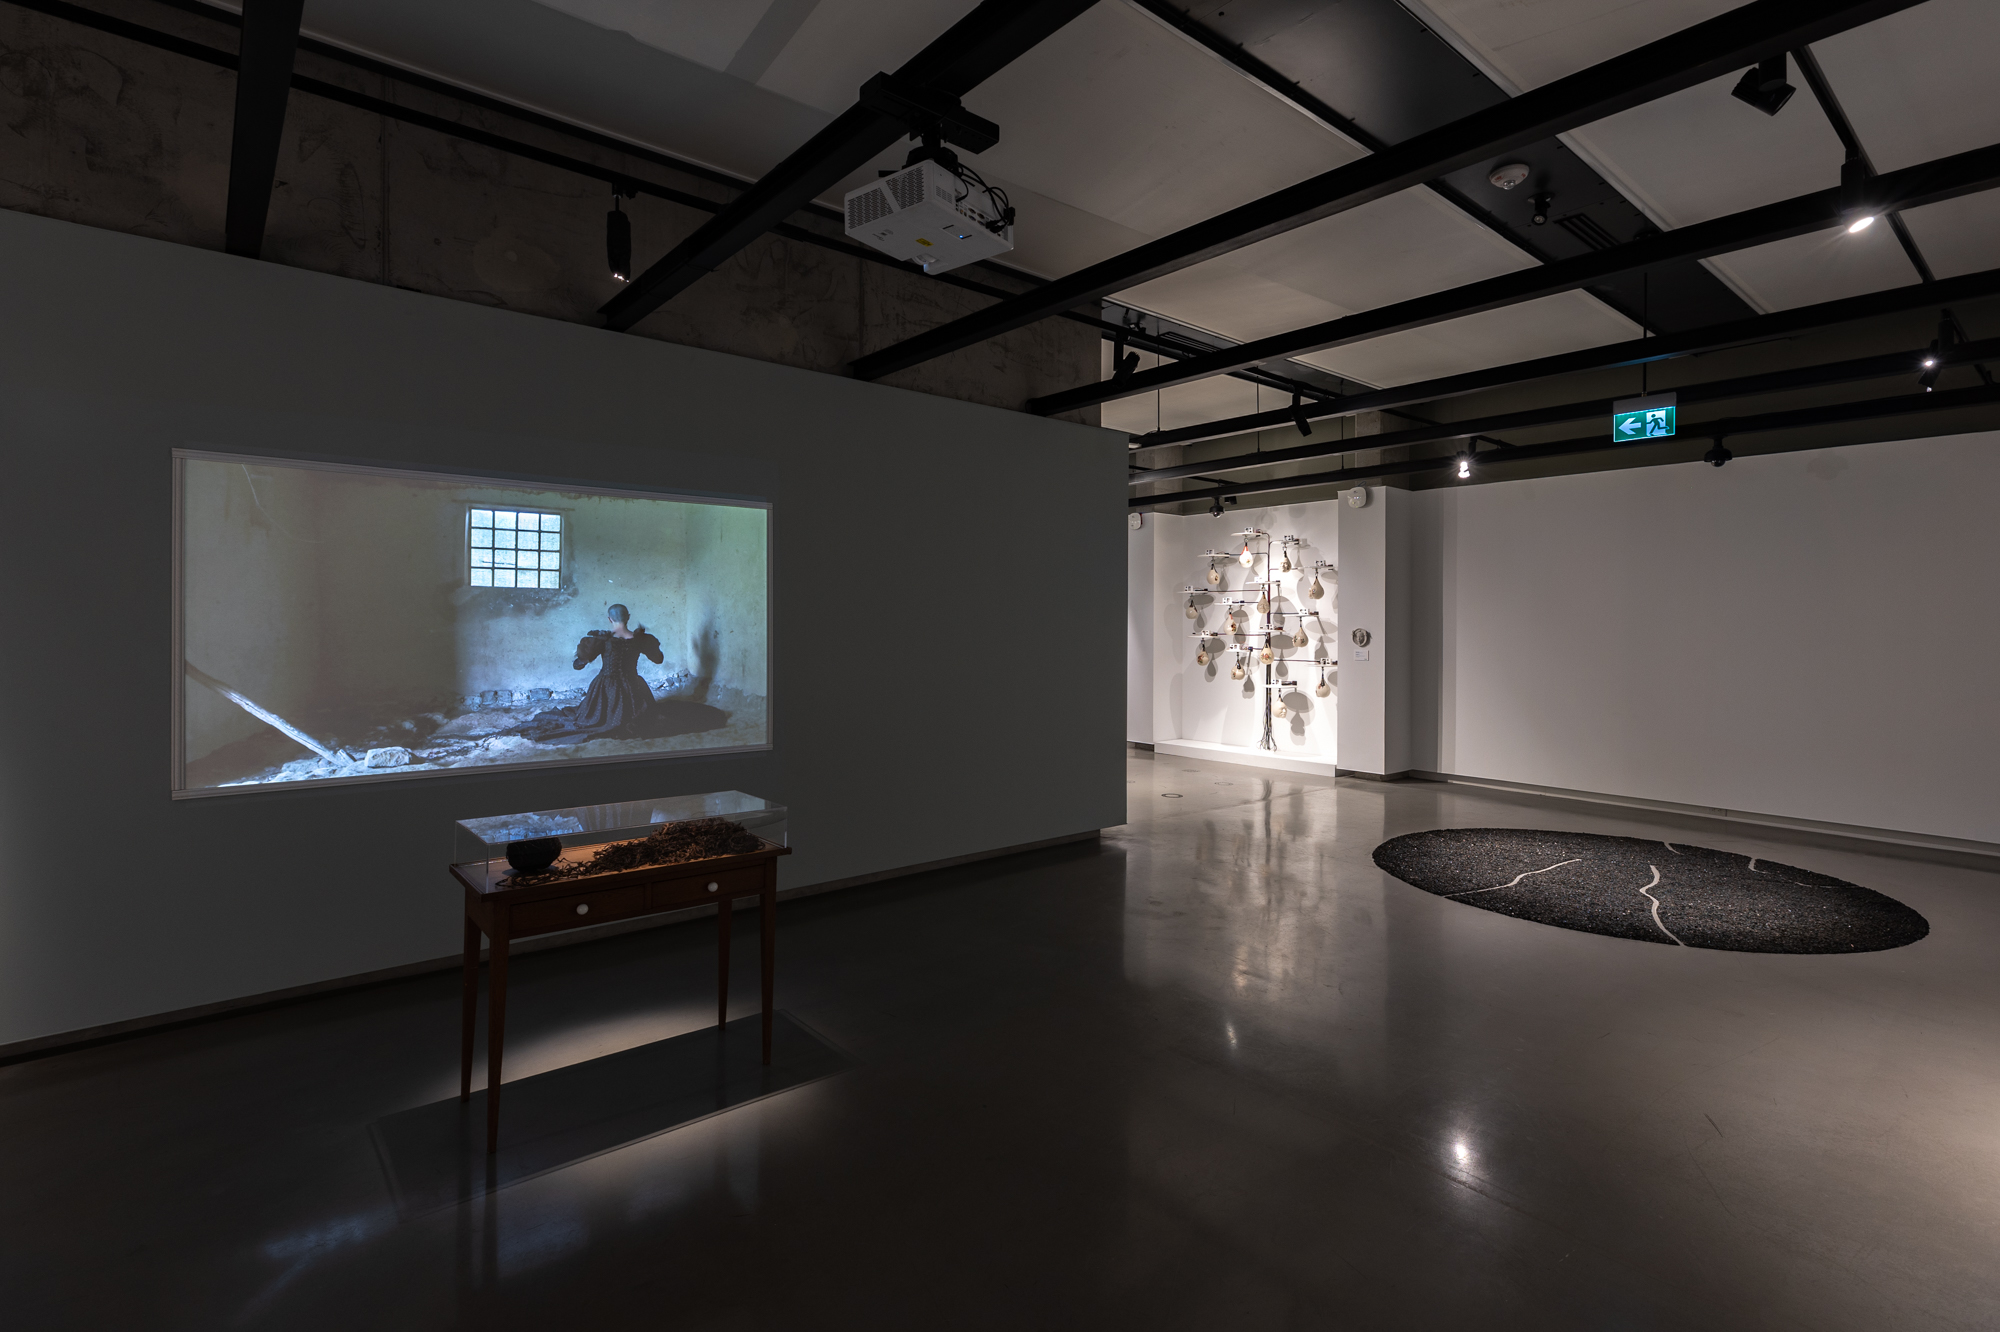 An overview of the gallery space showing a projected image of a woman in a black Victorian style dress, a large circle of coal on the floor and a tree line branched into ceramic punch bags